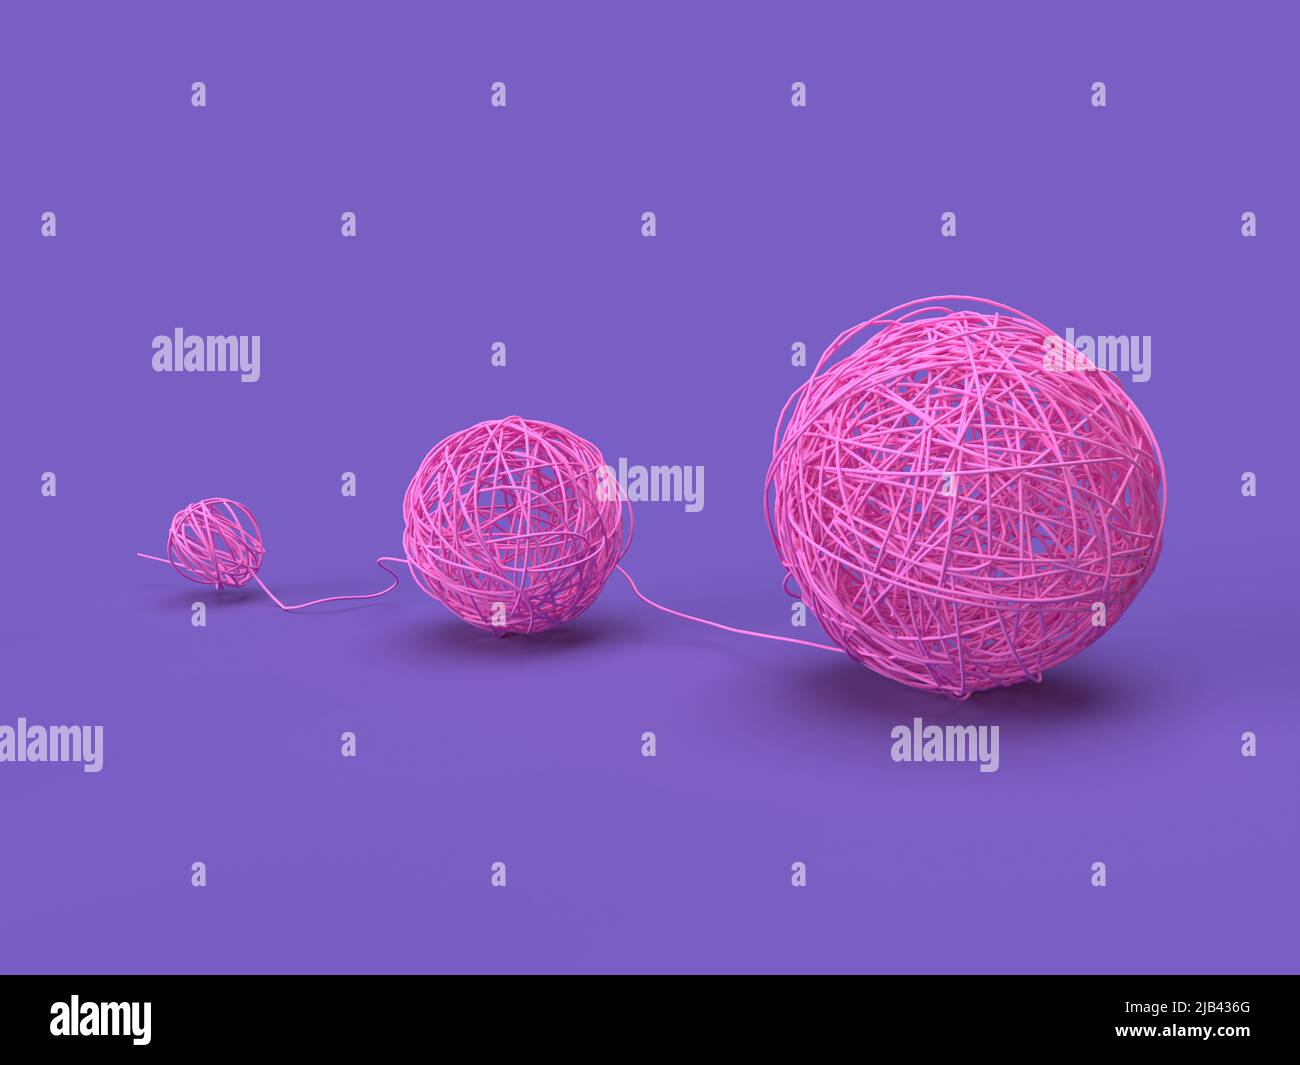 3 messy wire knots - 3d illustration  of growing problem Stock Photo